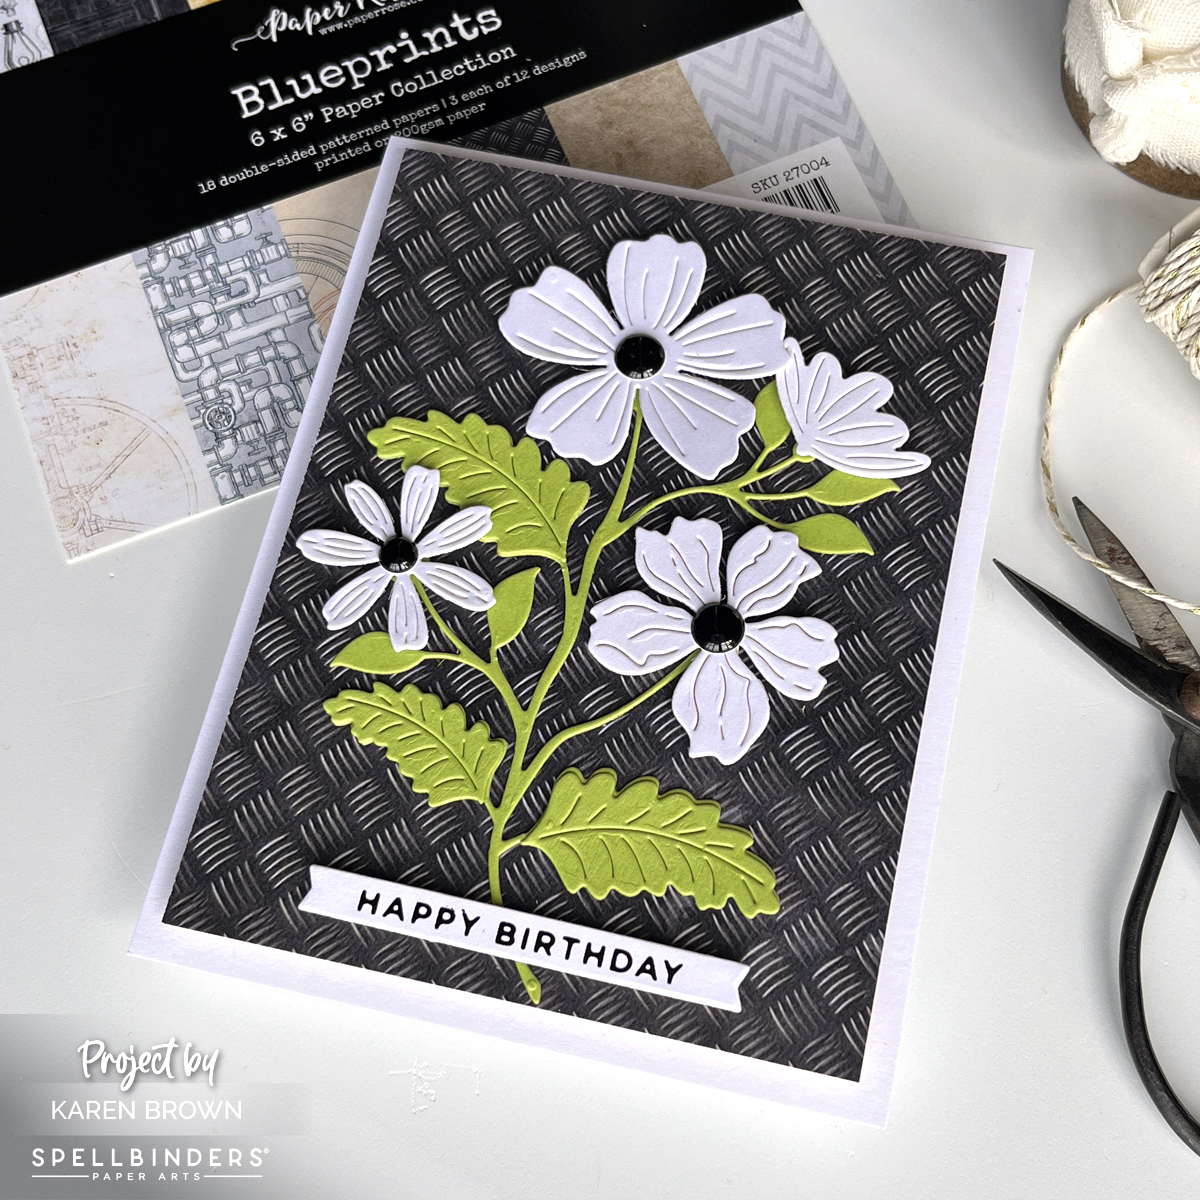 Paper Rose Blueprints printed paper collection is funky, interesting and adds an edgy vibe to your papercrafting, cardmaking and scrapbooking projects.  